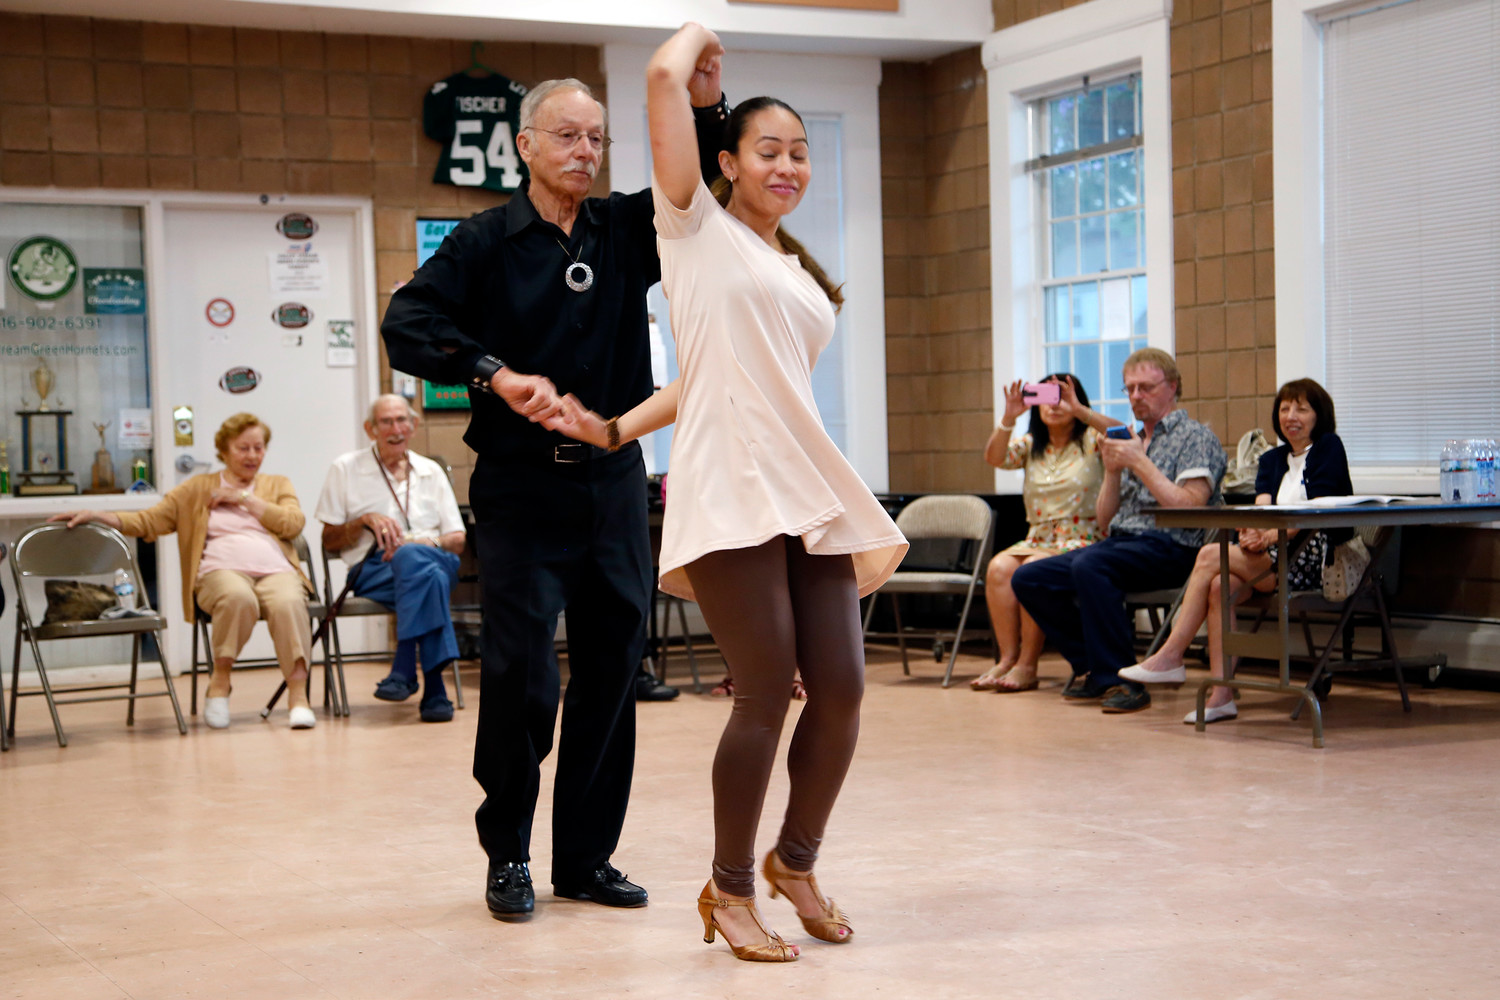 Guy Ferrara, above with dancing partner Karina Hernandez, led several free salsa dancing lessons for senior citizens in Valley Stream this year. His entertaining persona has earned him something of a cult following.